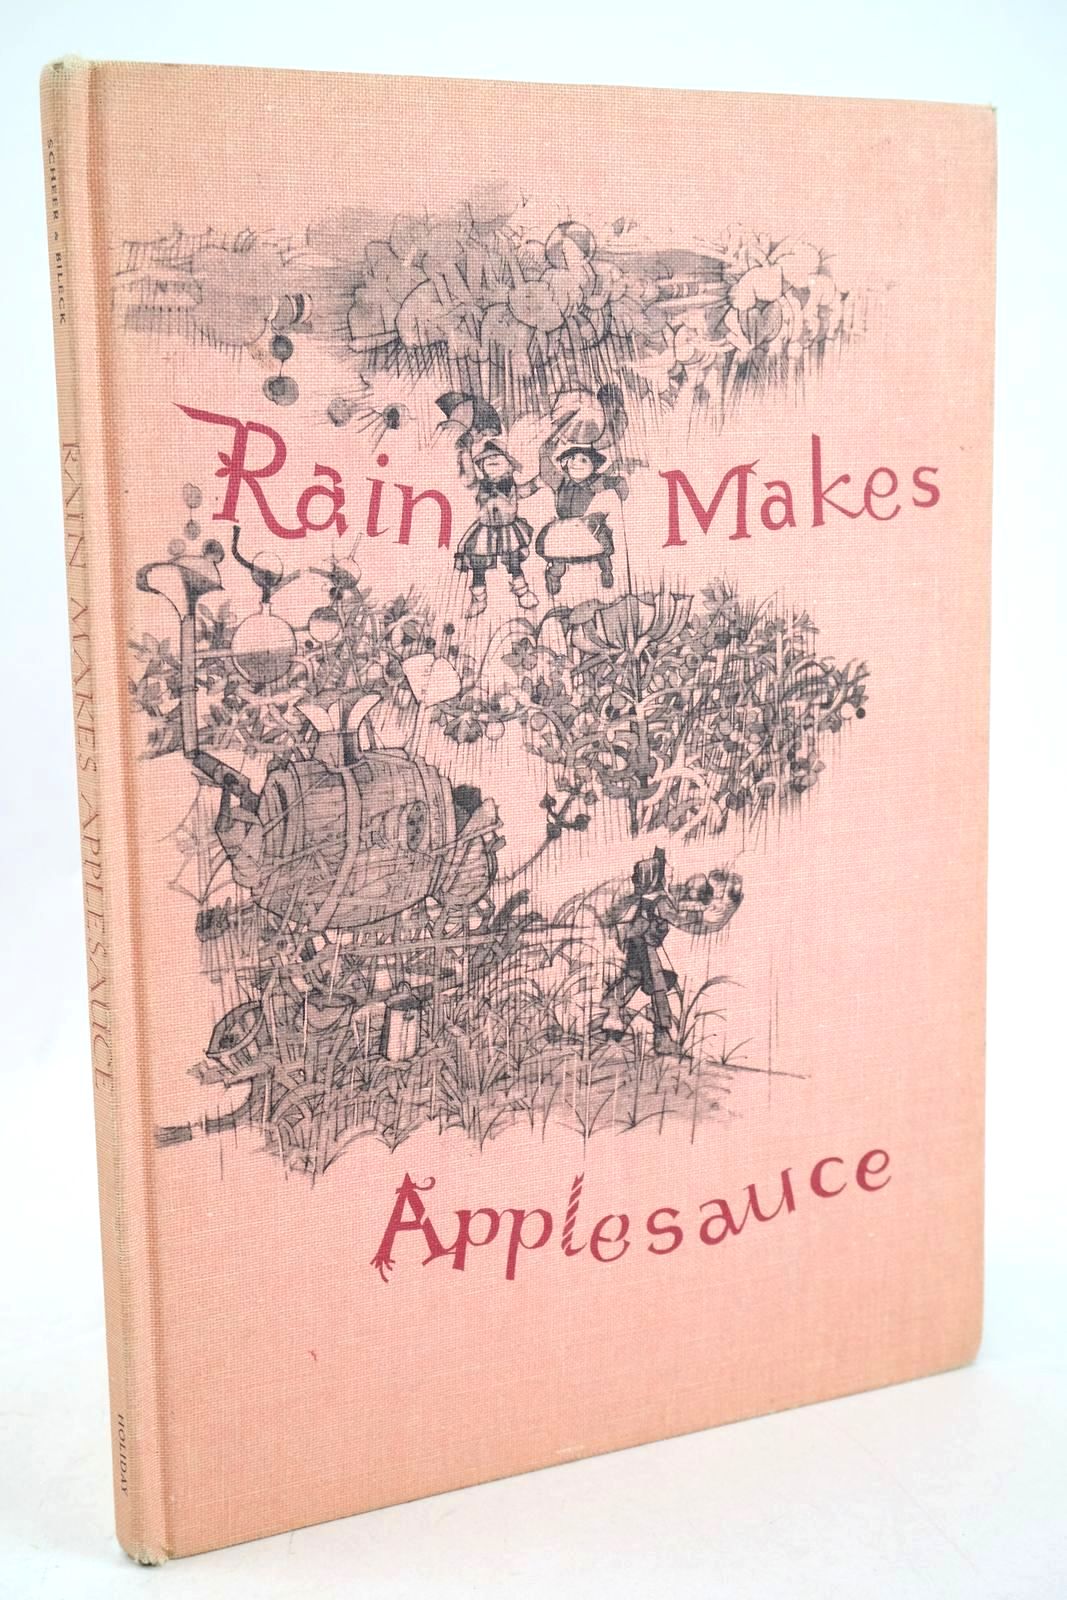 Photo of RAIN MAKES APPLESAUCE written by Scheer, Julian illustrated by Bileck, Marvin published by Holiday House, New York (STOCK CODE: 1327684)  for sale by Stella & Rose's Books